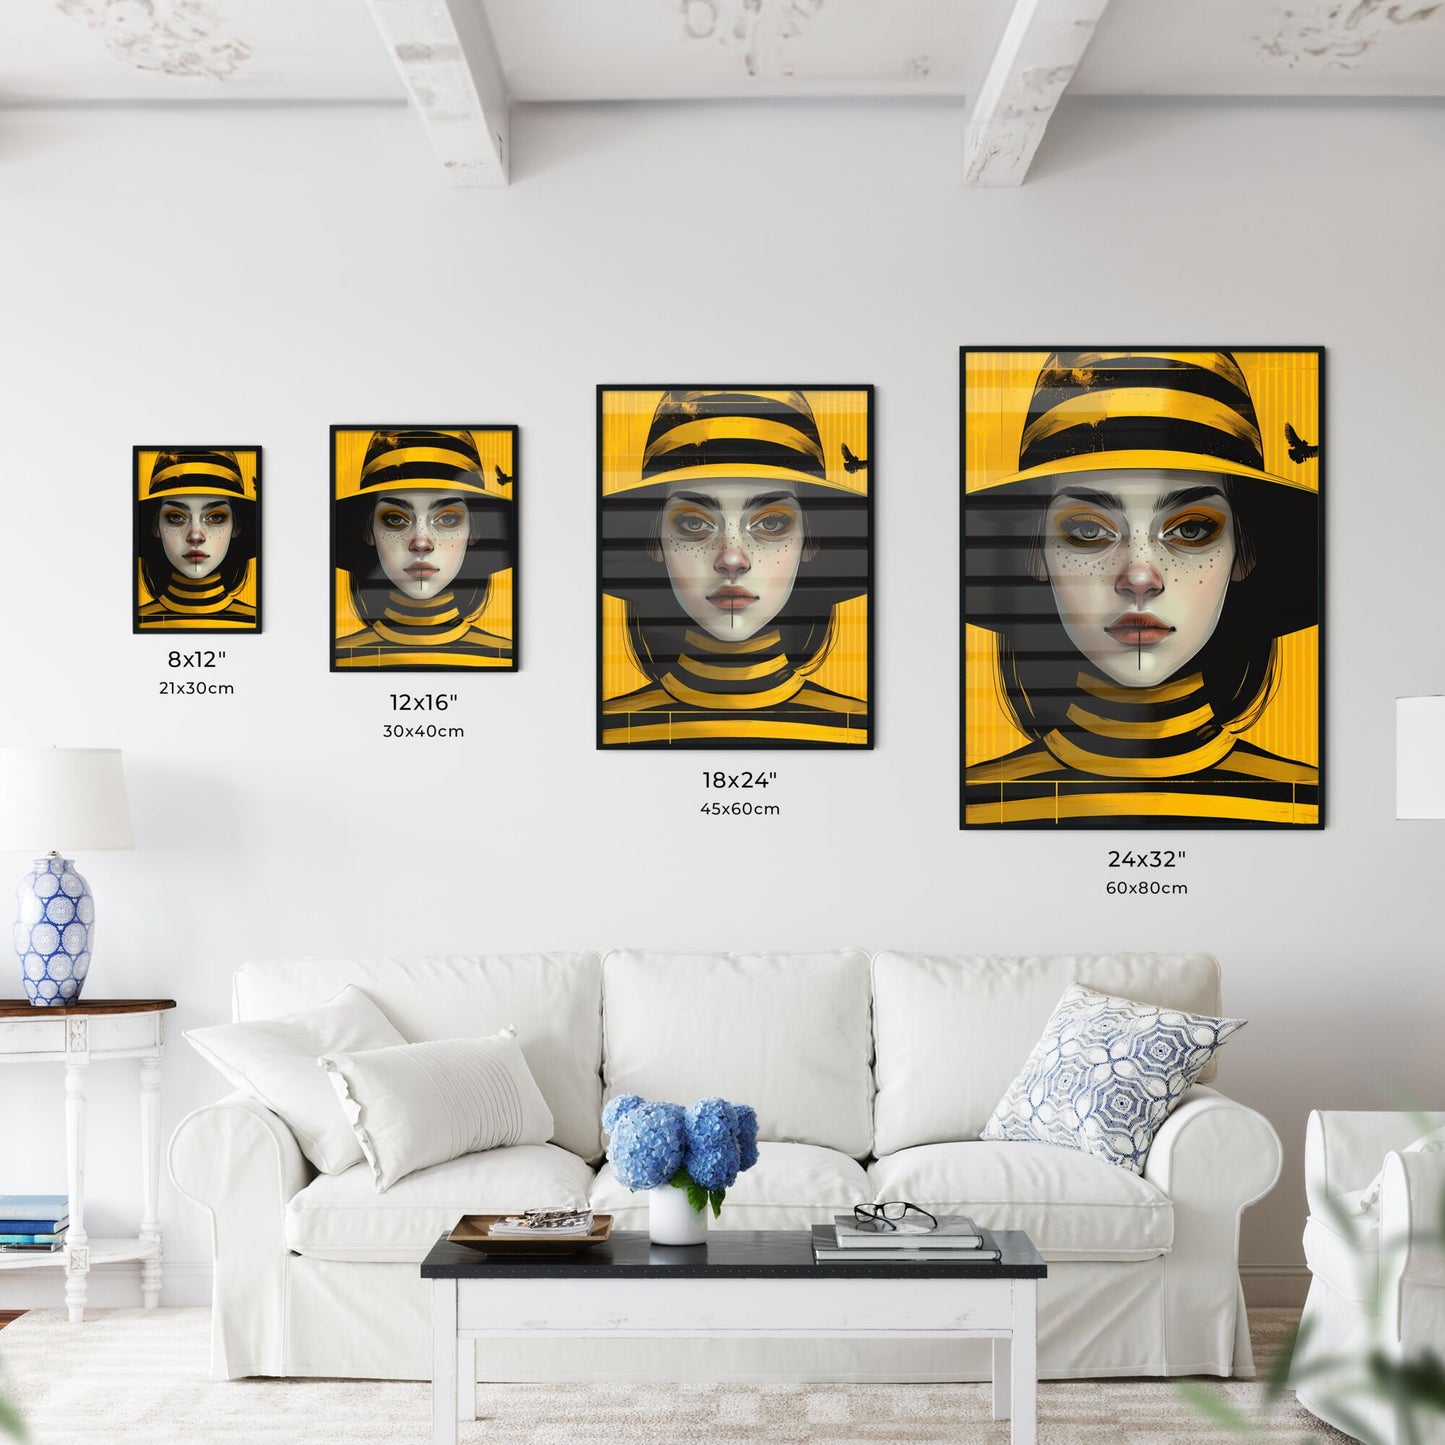 Striking Yellow-and-Black Art Poster Featuring Woman in Hat Default Title